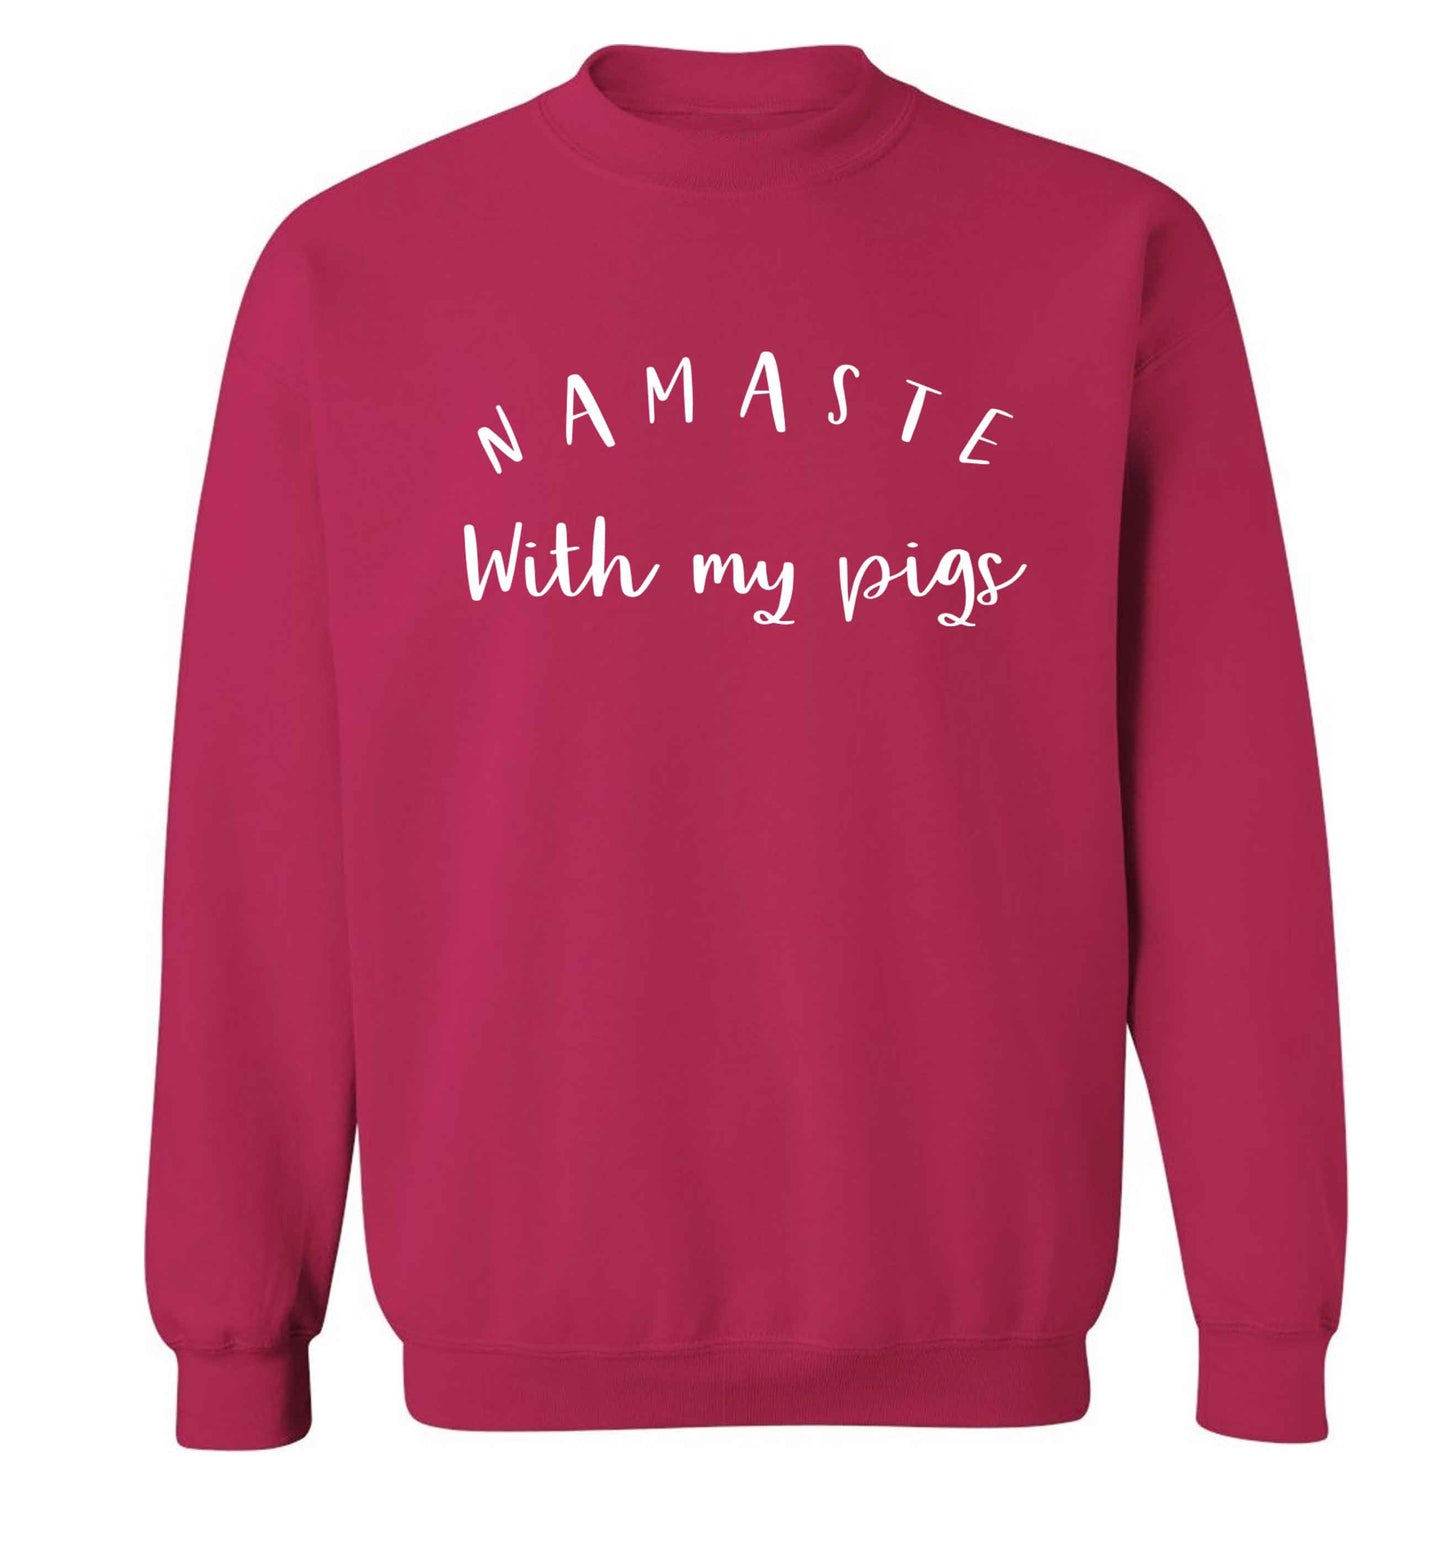 Namaste with my pigs Adult's unisex pink Sweater 2XL